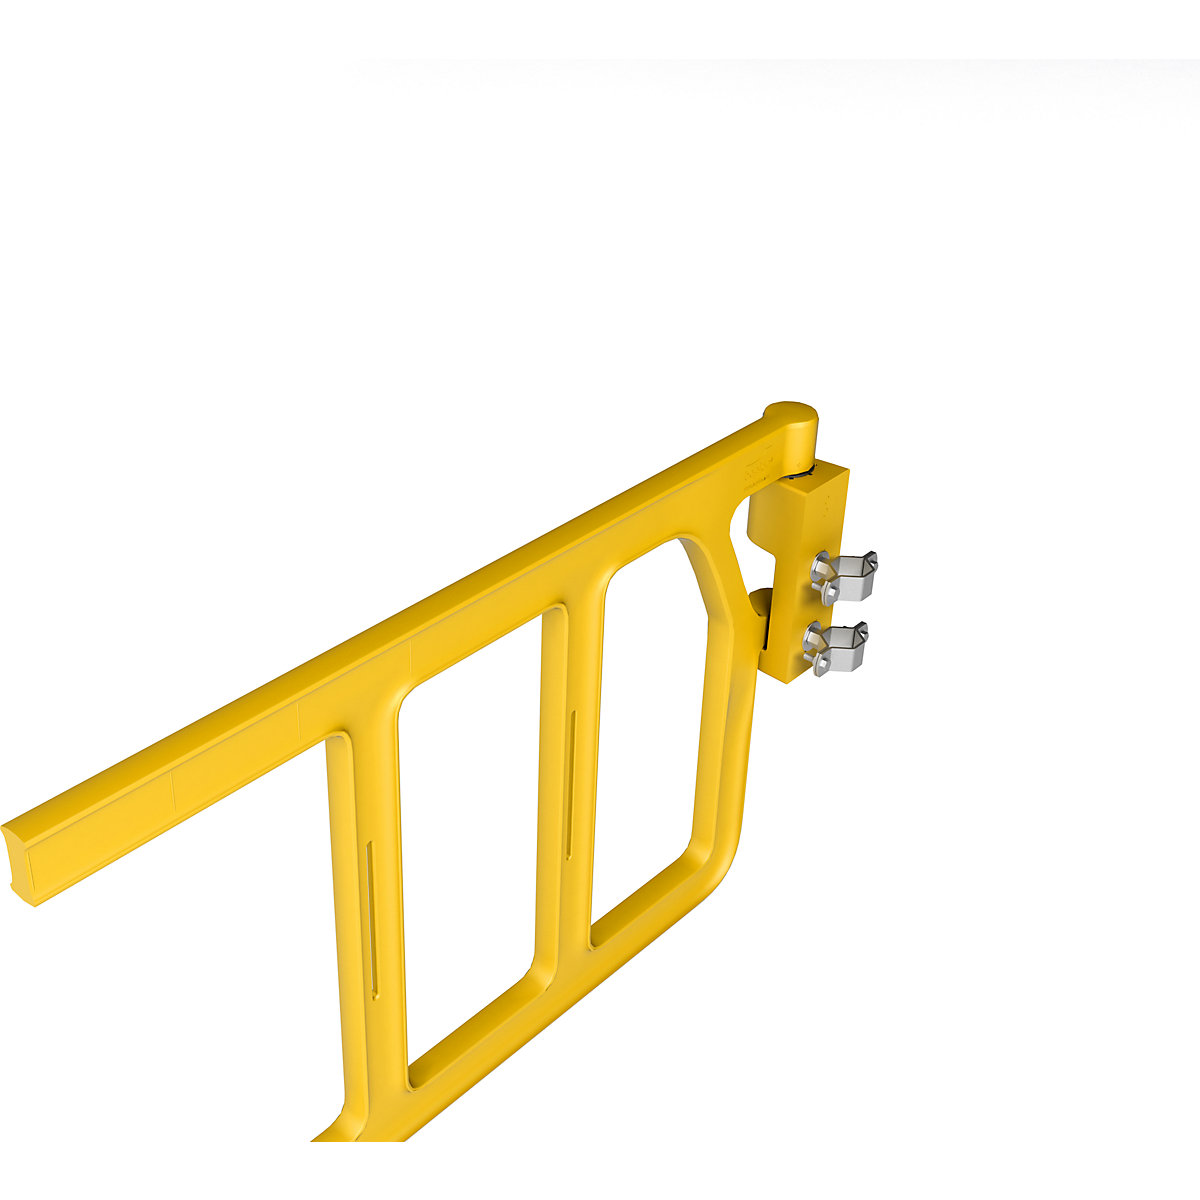 Clamp for industrial safety door